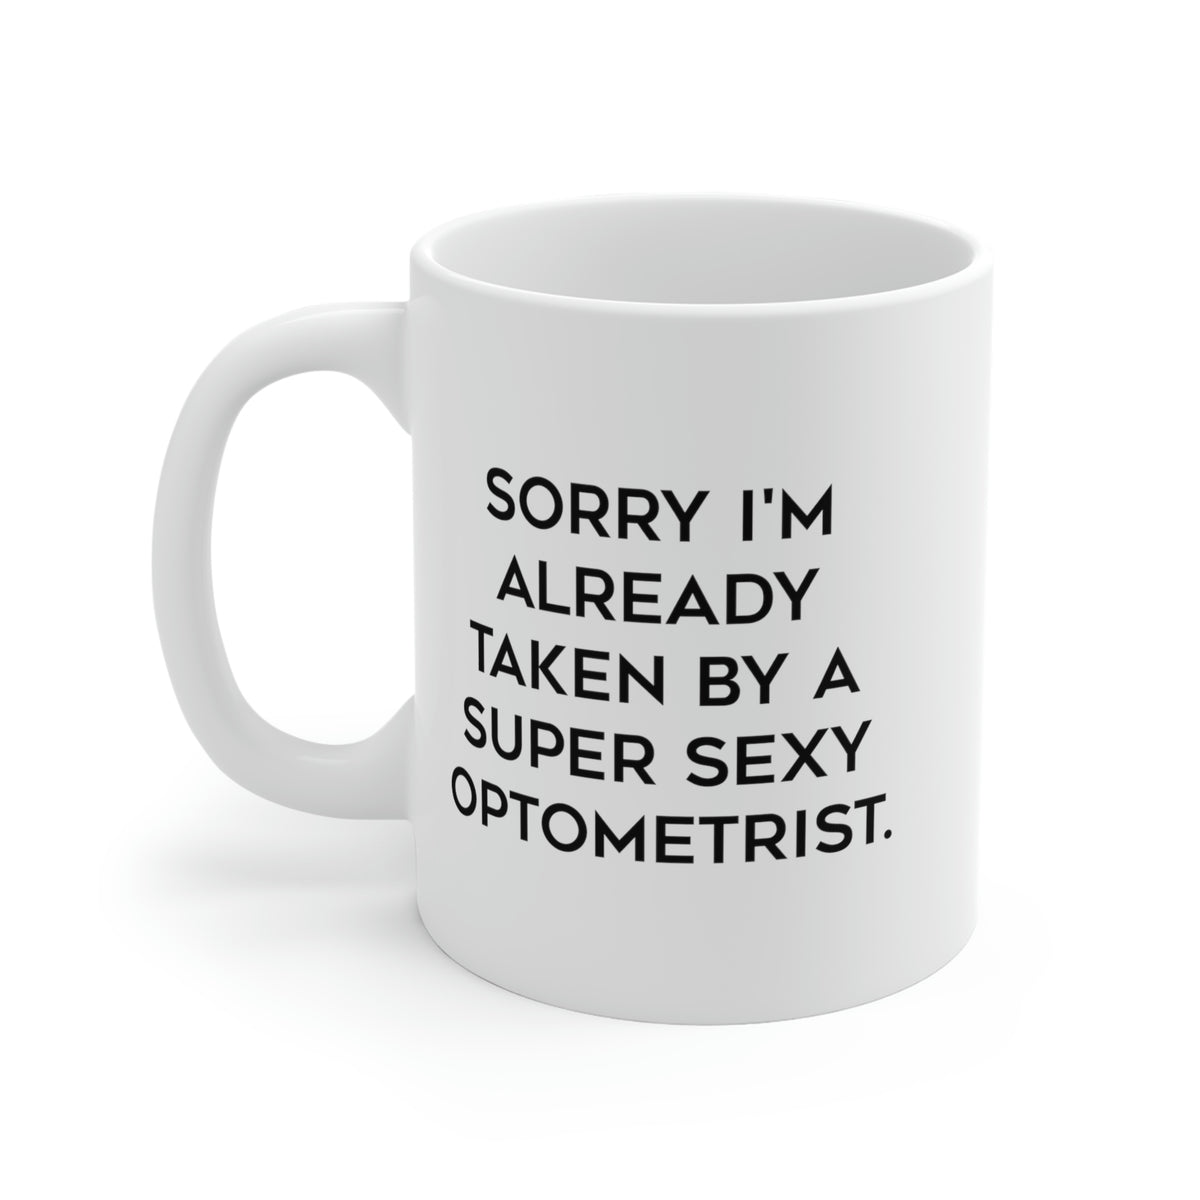 Funny Optometrist 11oz 15oz Mug, Sorry I'm Already Taken by a Super Sexy Optometrist, Epic for Colleagues, Holiday